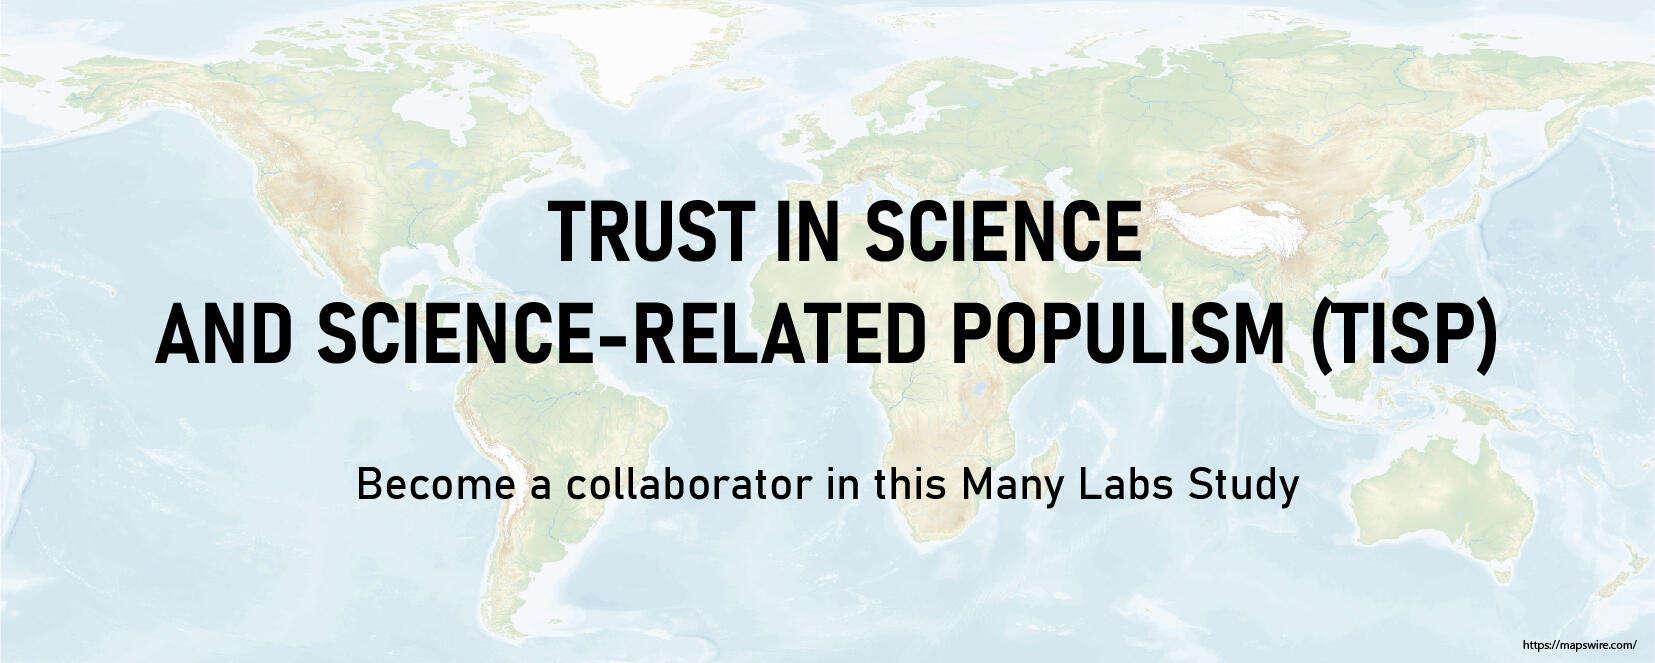 Trust in science and science-related populism (TISP)